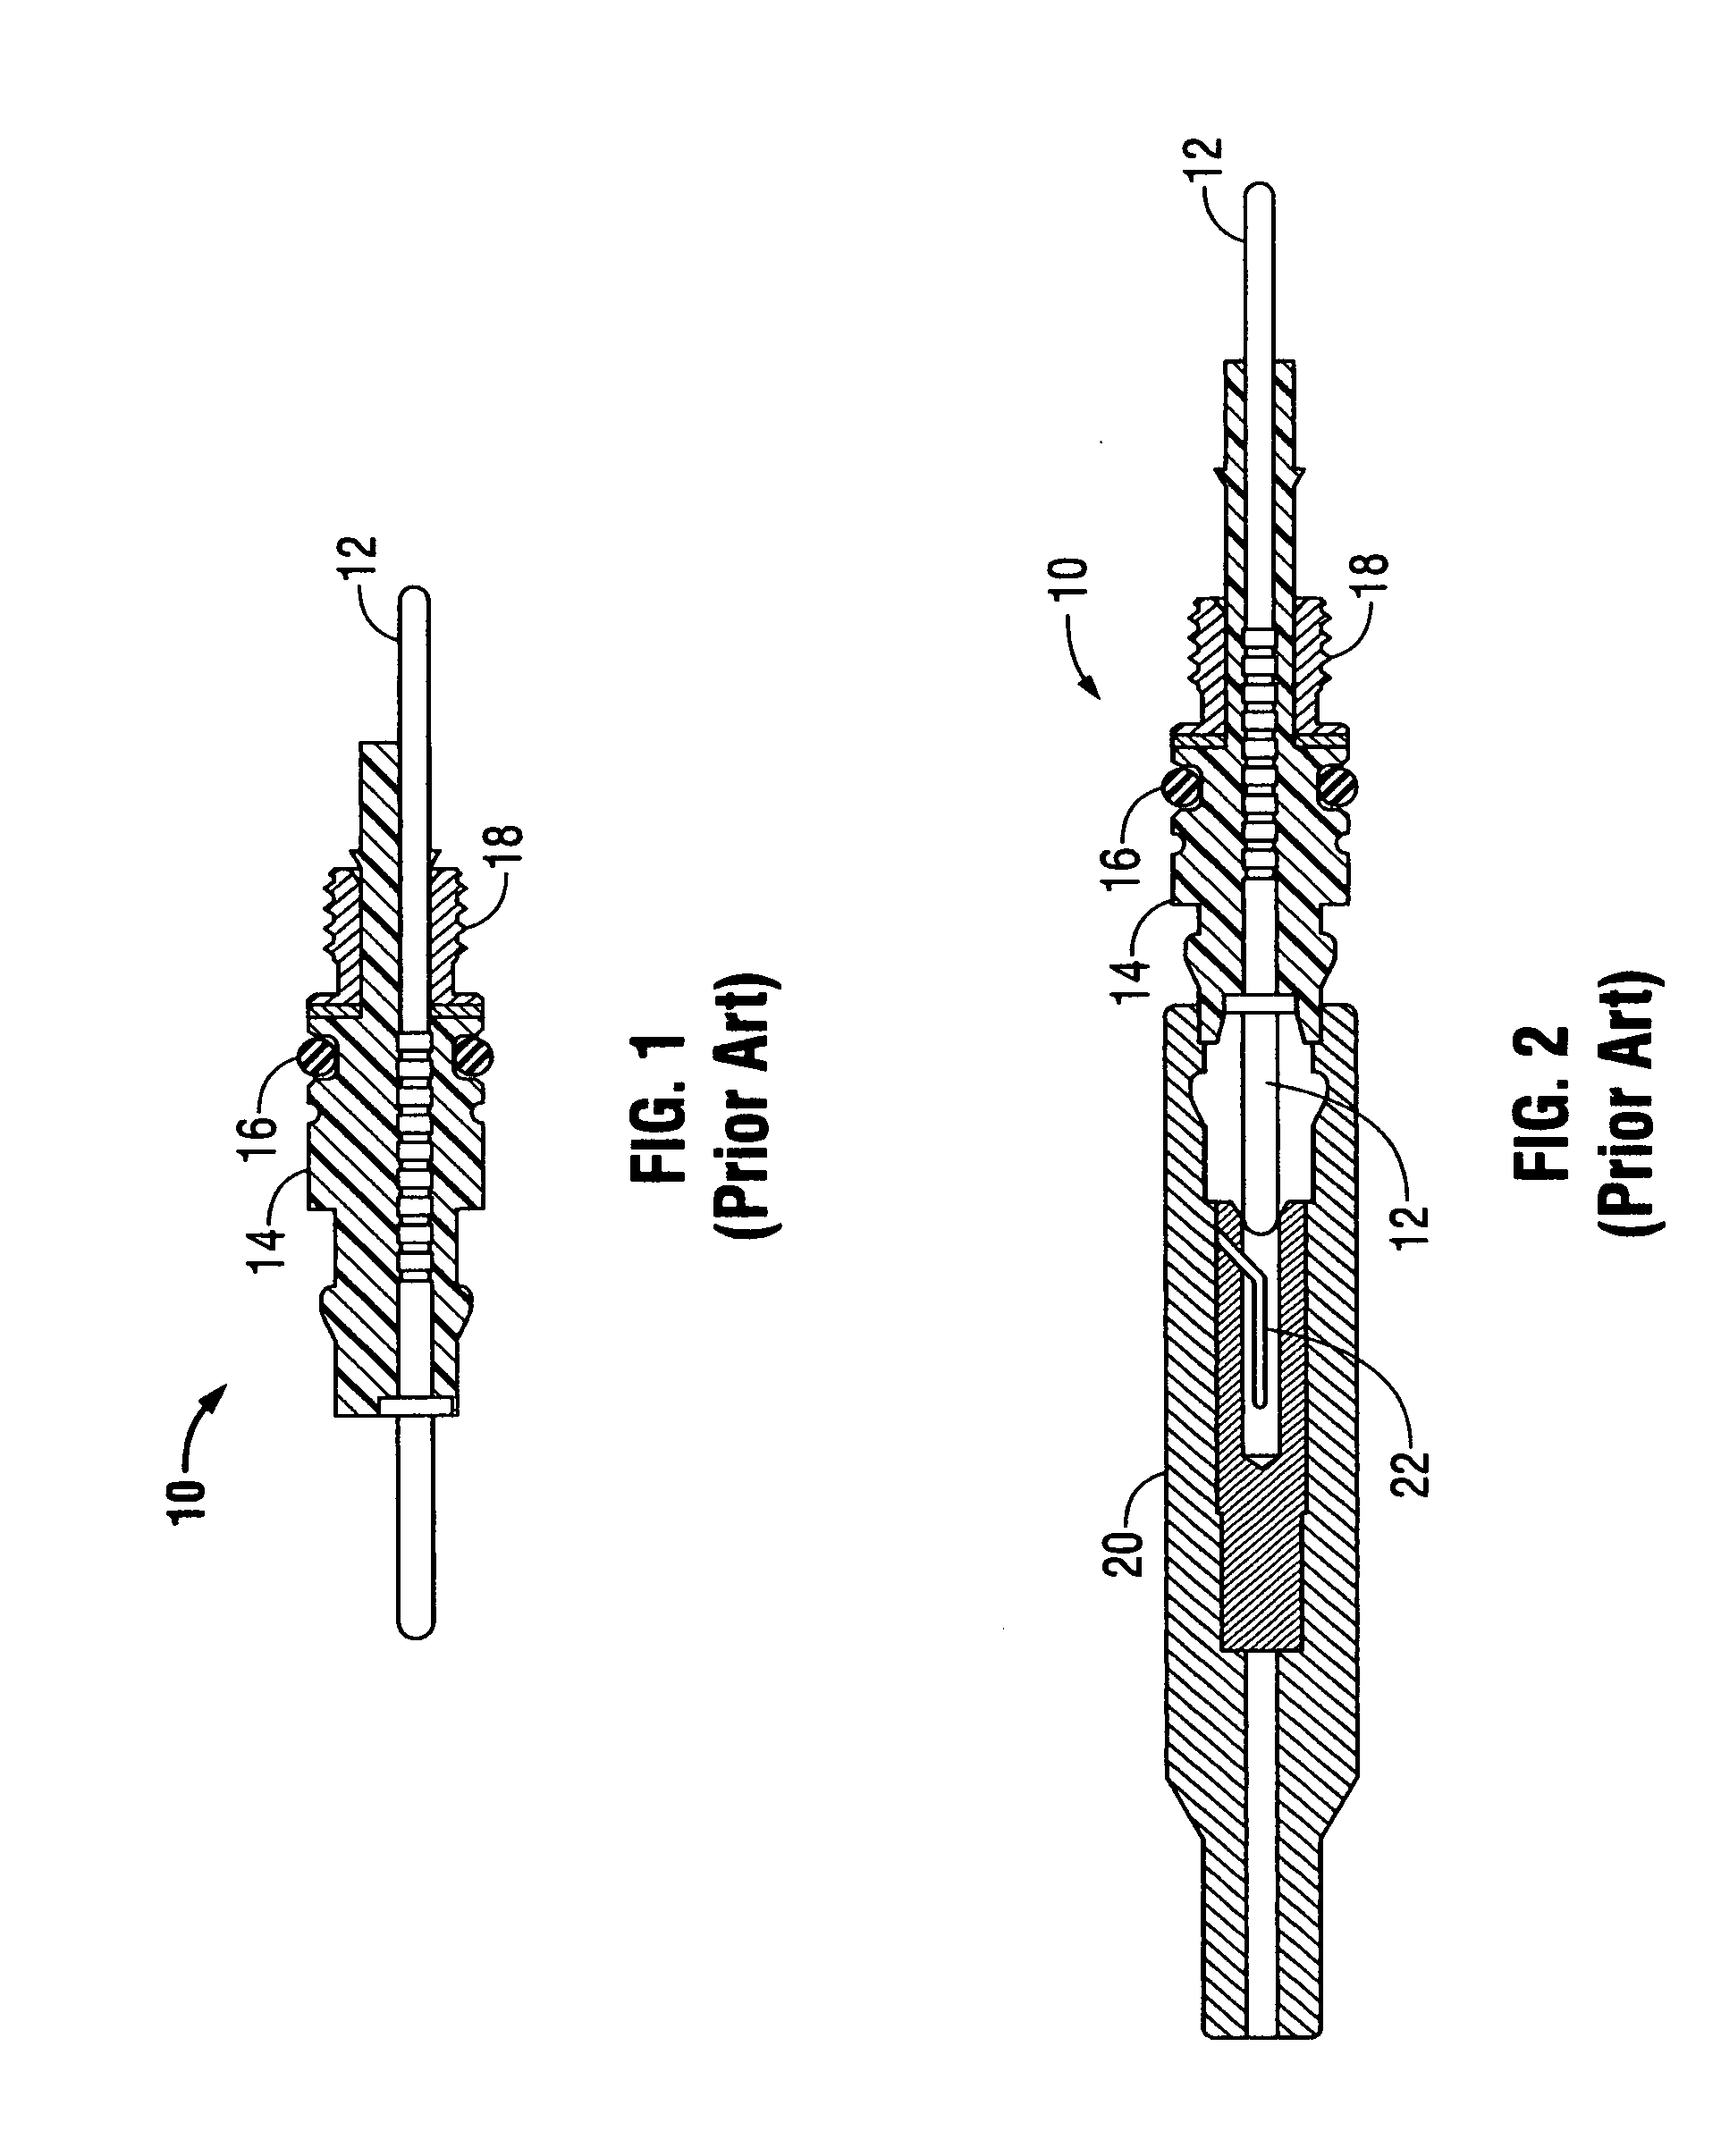 Electrical connectors and sensors for use in high temperature, high pressure oil and gas wells